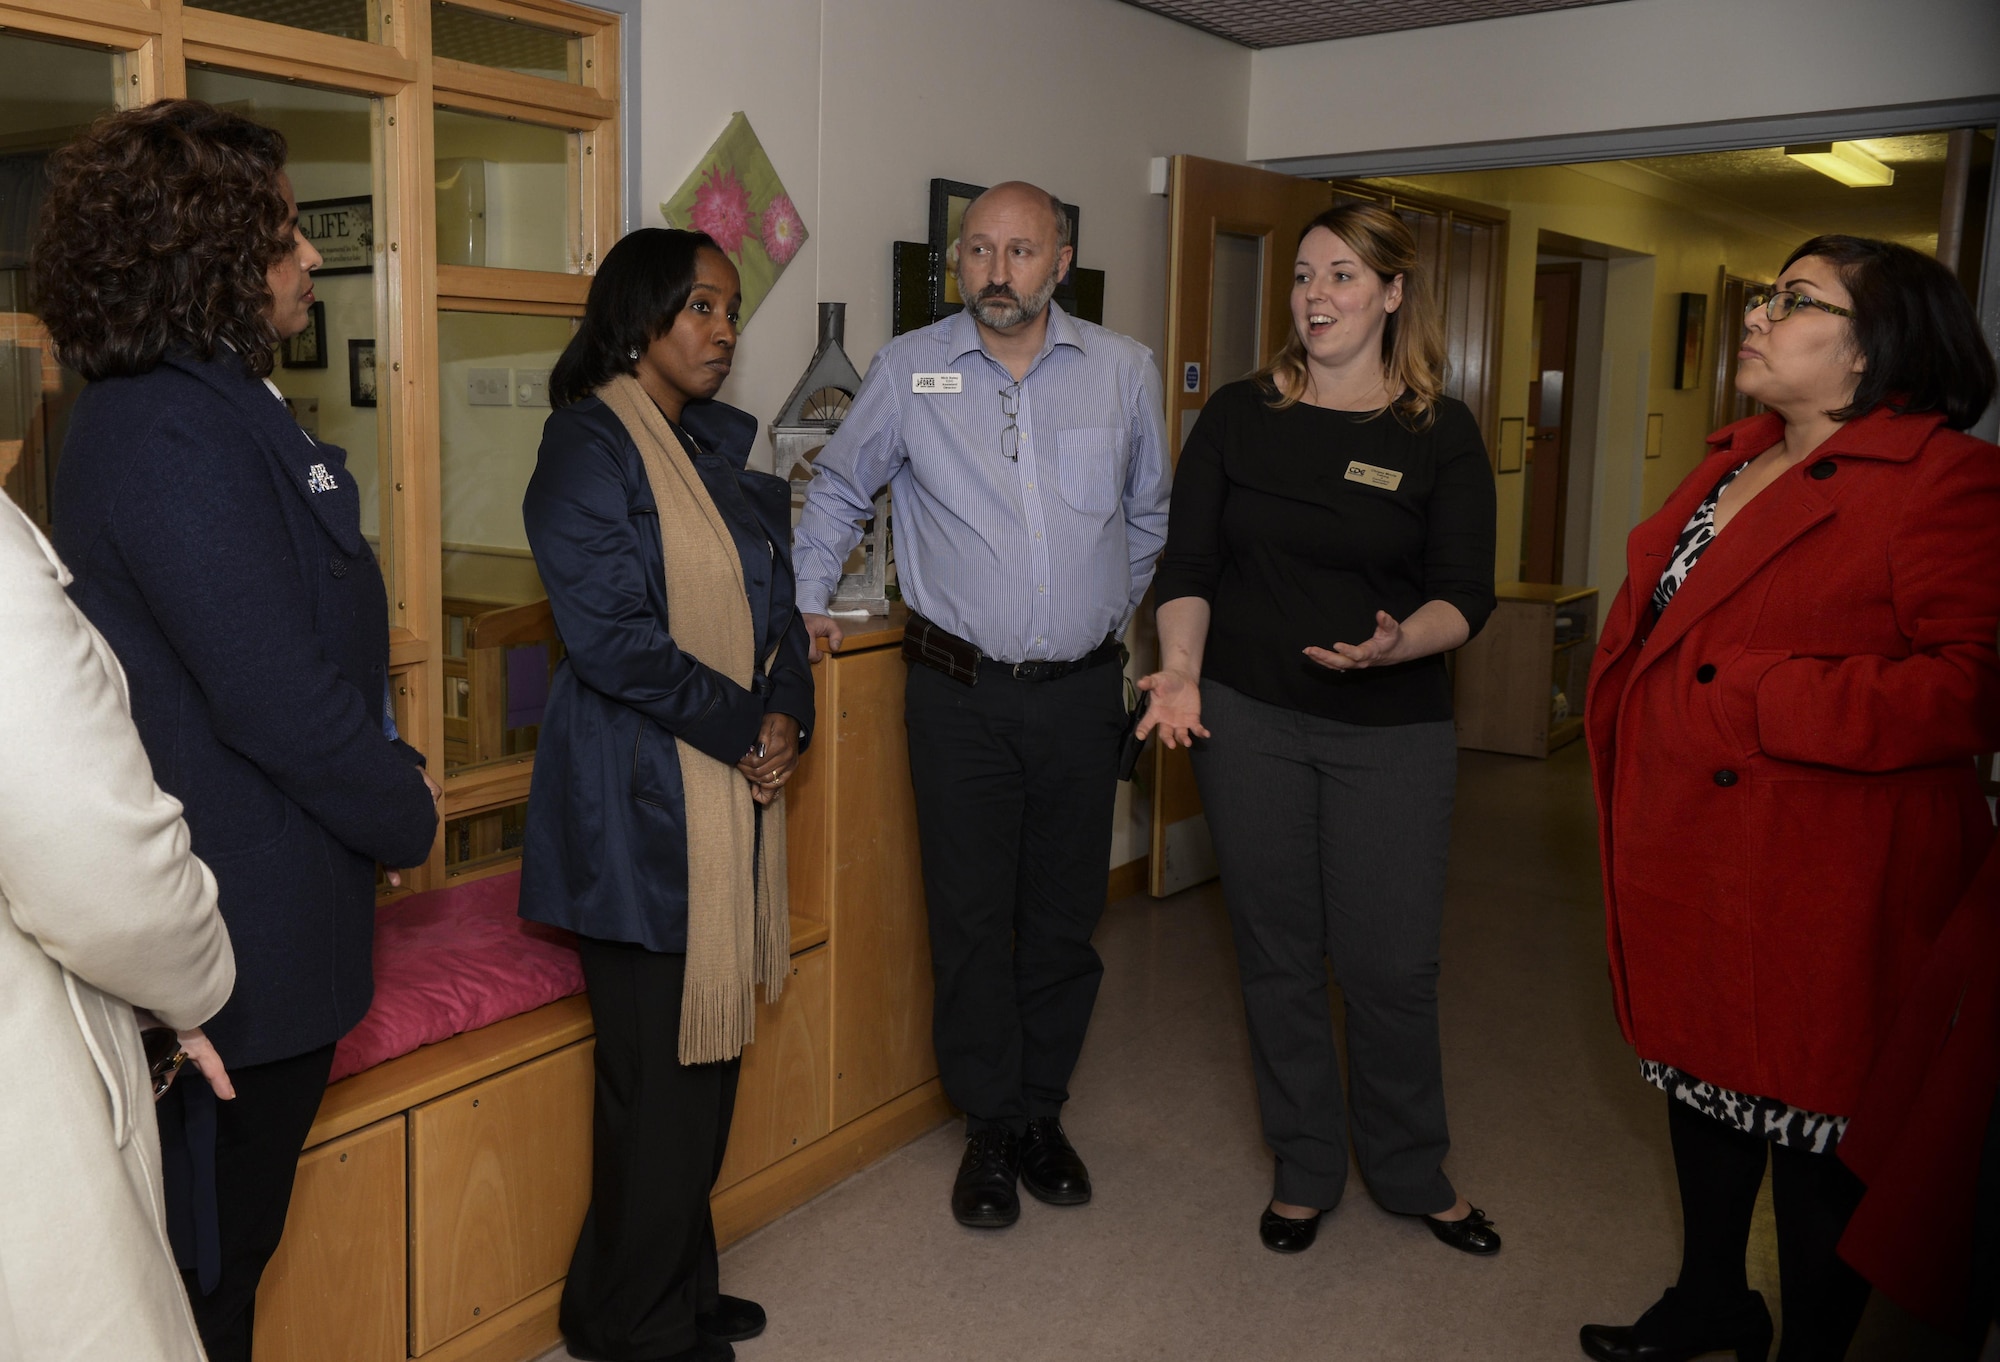 Amy Clark, left, spouse of U.S. Air Force Lt. Gen. Richard Clark, 3rd Air Force commander; and Yolanda Easton, second from left, spouse of U.S. Air Force Chief Master Sgt. Phillip Easton, 3rd Air Force command chief, visit the child development center during a tour Jan. 5, 2016, on RAF Mildenhall, England. The CDC provides quality childcare for children, ages 6 weeks to 5 years in an environment that celebrates each child’s individual successes through social, cognitive, affective, physical, language and creative development. (U.S. Air Force photo by Airman 1st Class Tenley Long)